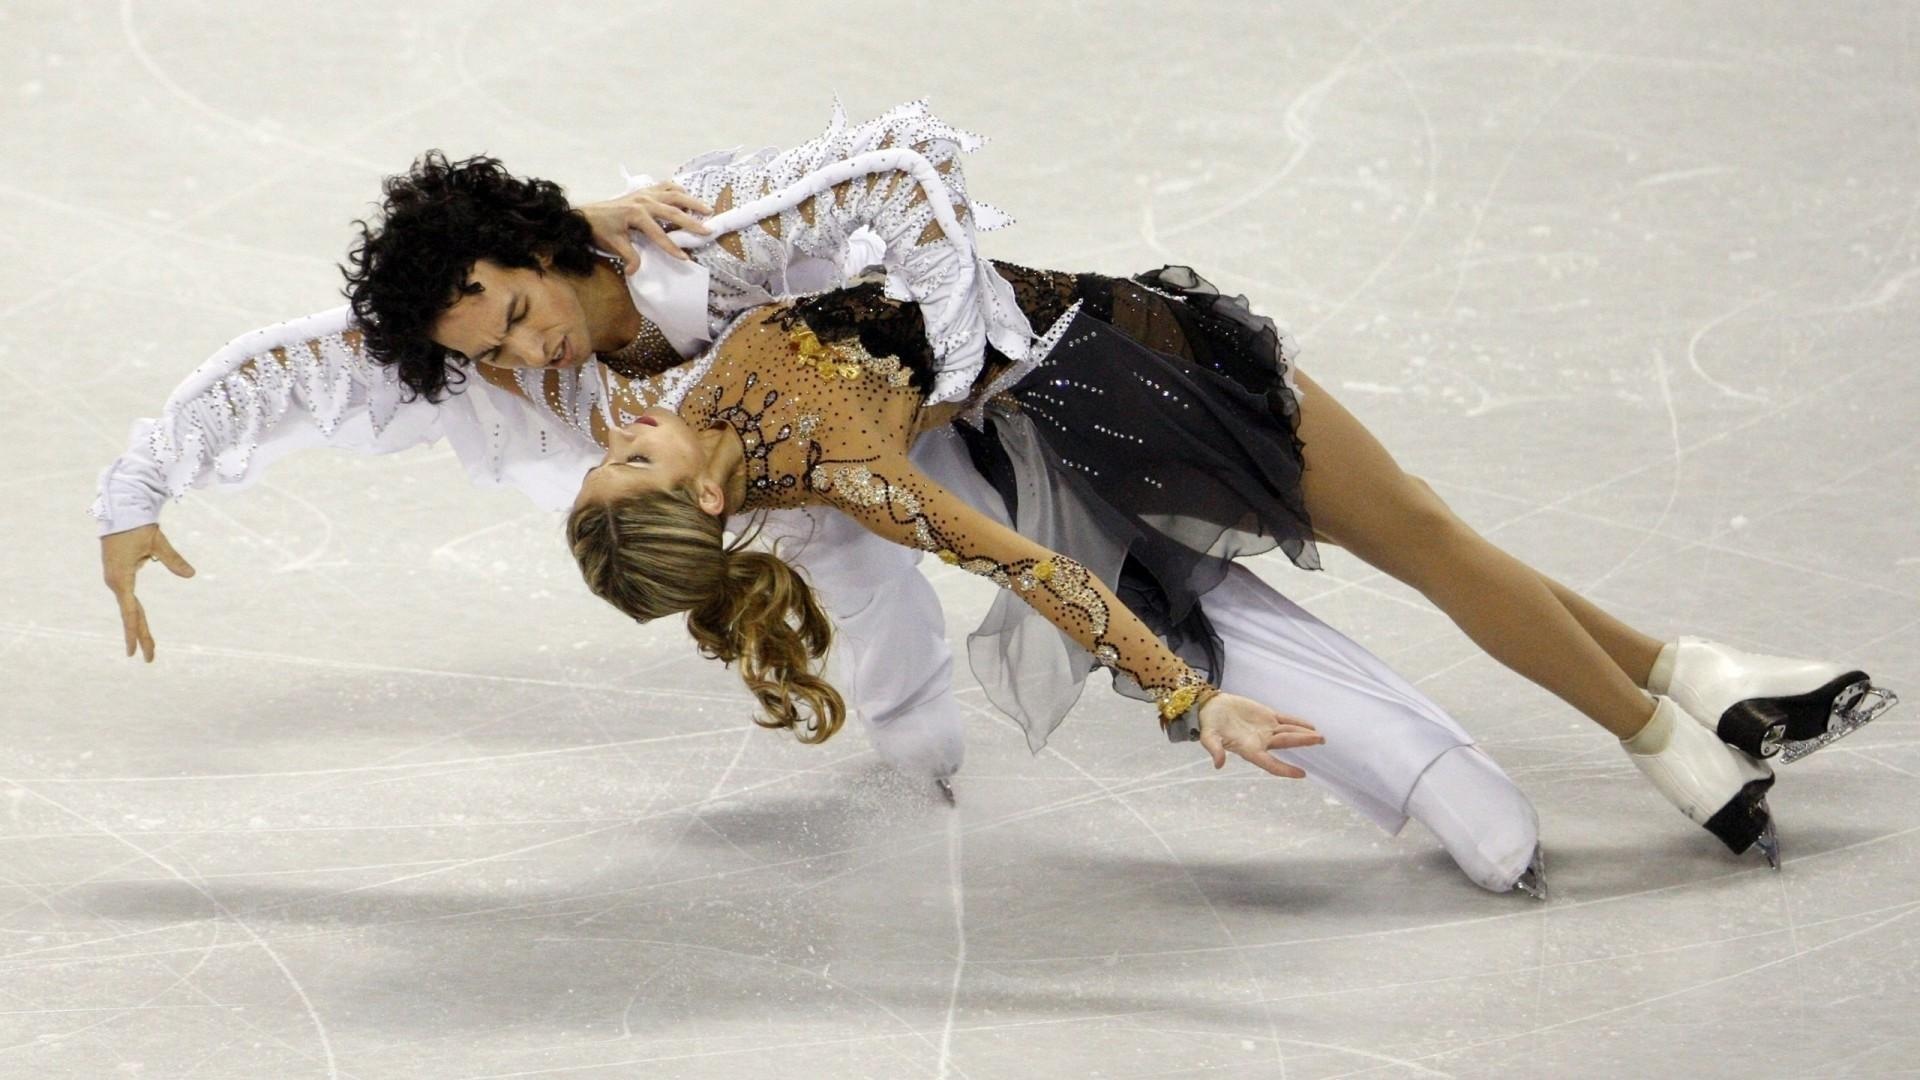 Pair Skating: Tanith Belbin and Benjamin Agosto, American ice dancers, World medalists. 1920x1080 Full HD Background.